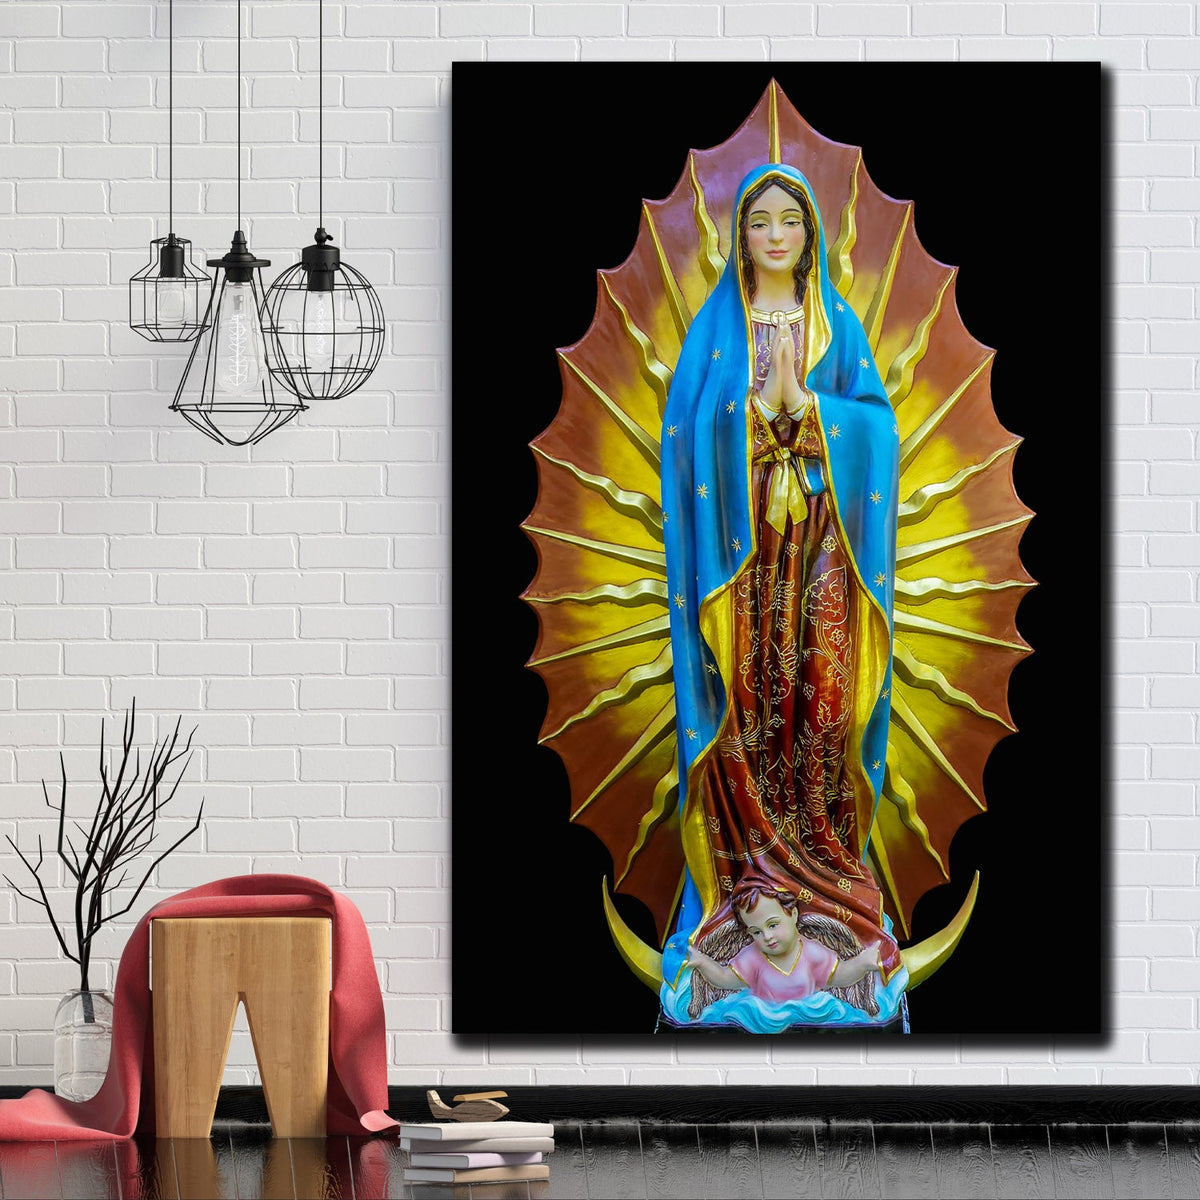 https://cdn.shopify.com/s/files/1/0387/9986/8044/products/MaryOurLadyOfGuadalupeCanvasArtprintStretched-4.jpg